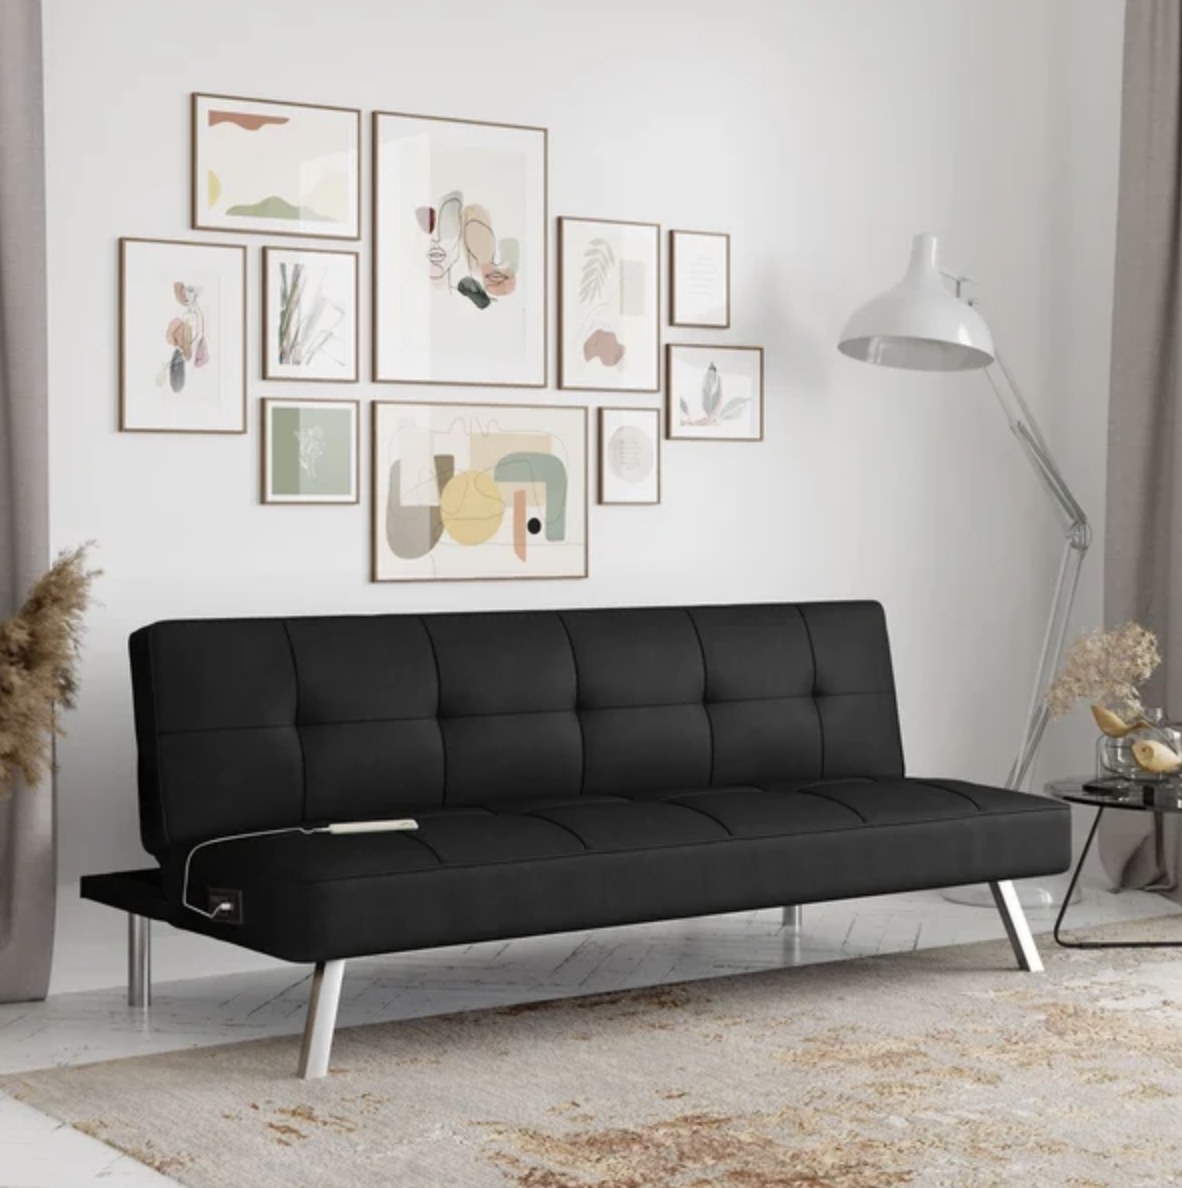 The black futon has silver legs and has a device plugged into its outlet